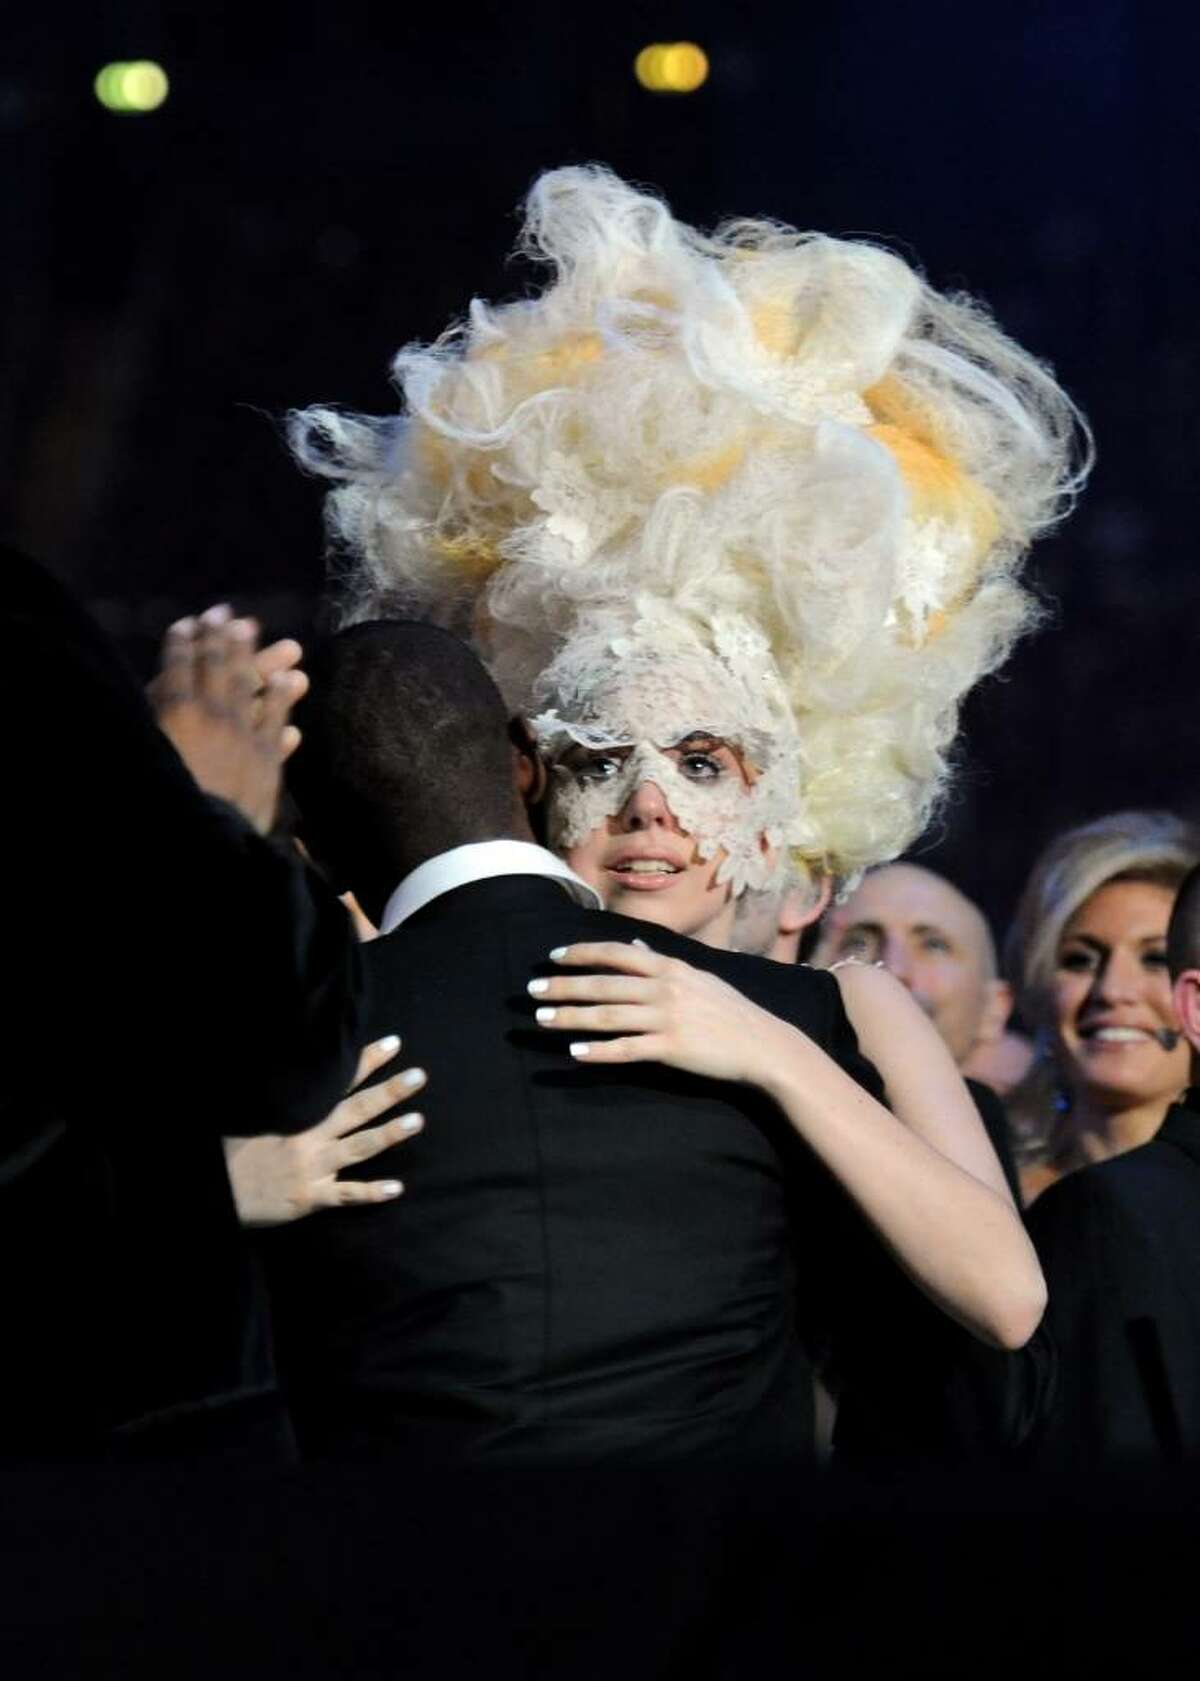 Caption: LONDON, ENGLAND - FEBRUARY 16: Lady Gaga accepts an award on stage at The Brit Awards 2010 at Earls Court on February 16, 2010 in London, England. (Photo by Gareth Cattermole/Getty Images) *** Local Caption *** Lady Gaga